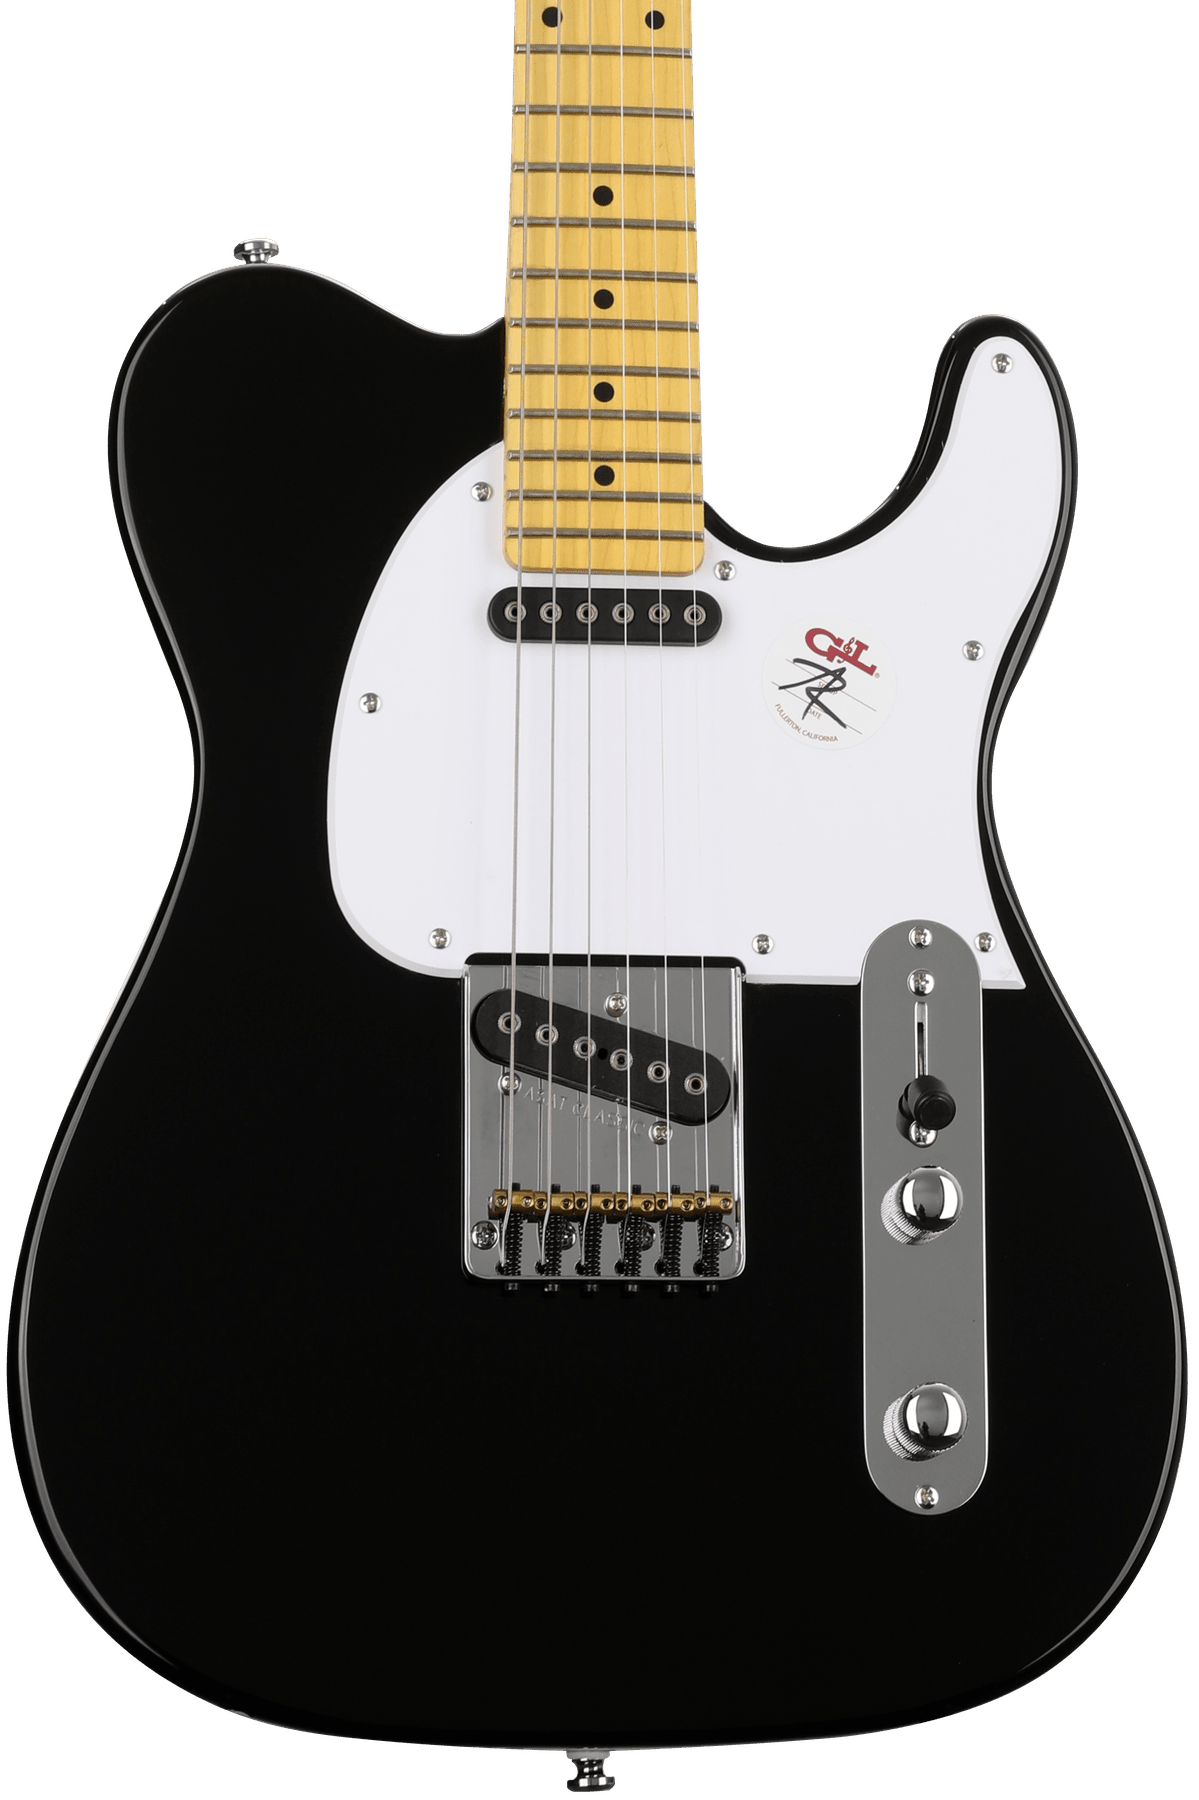 G&L Tribute ASAT Classic Electric Guitar - Gloss Black | Sweetwater